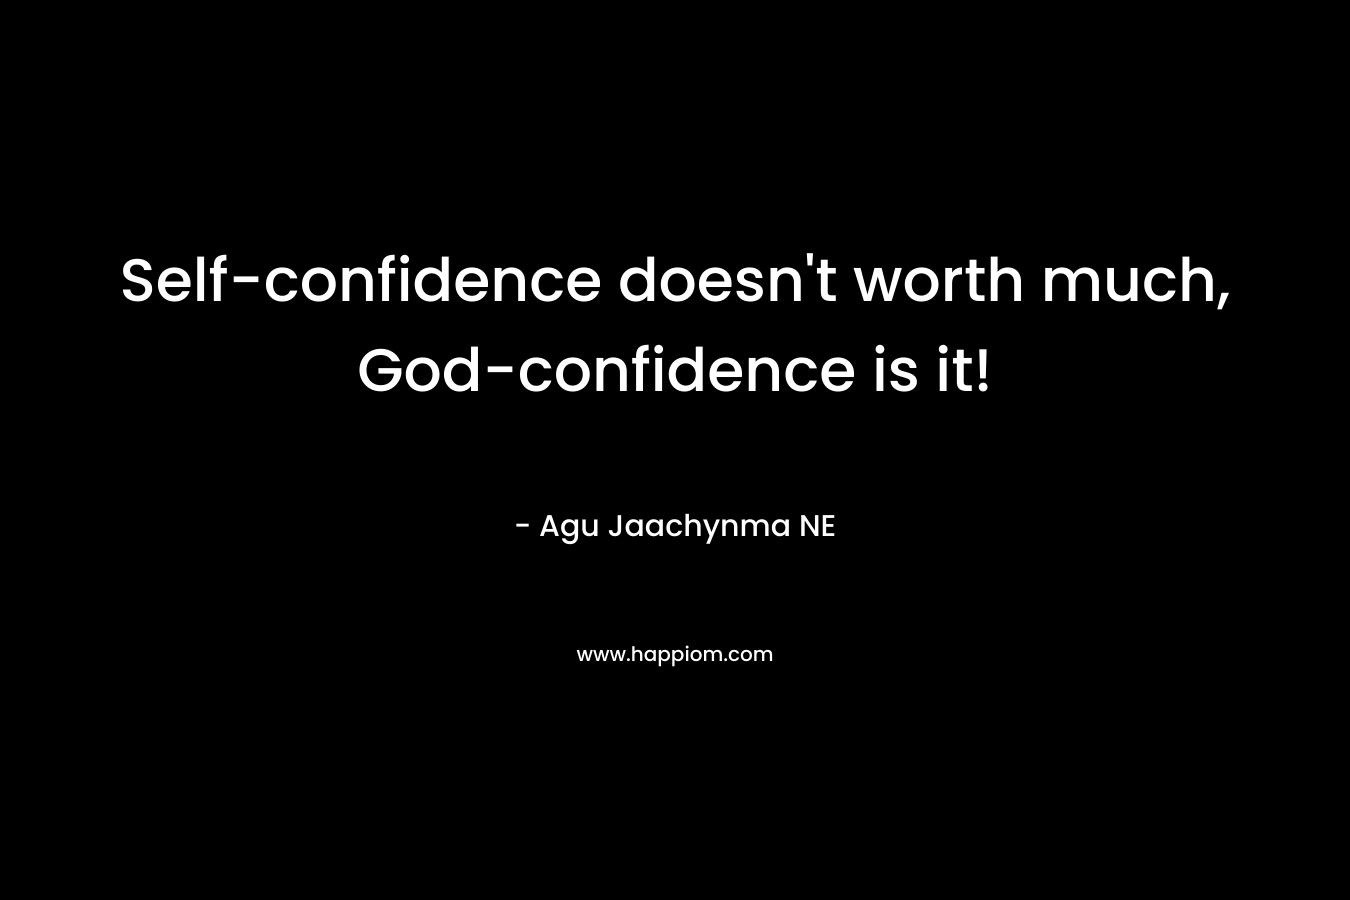 Self-confidence doesn't worth much, God-confidence is it!